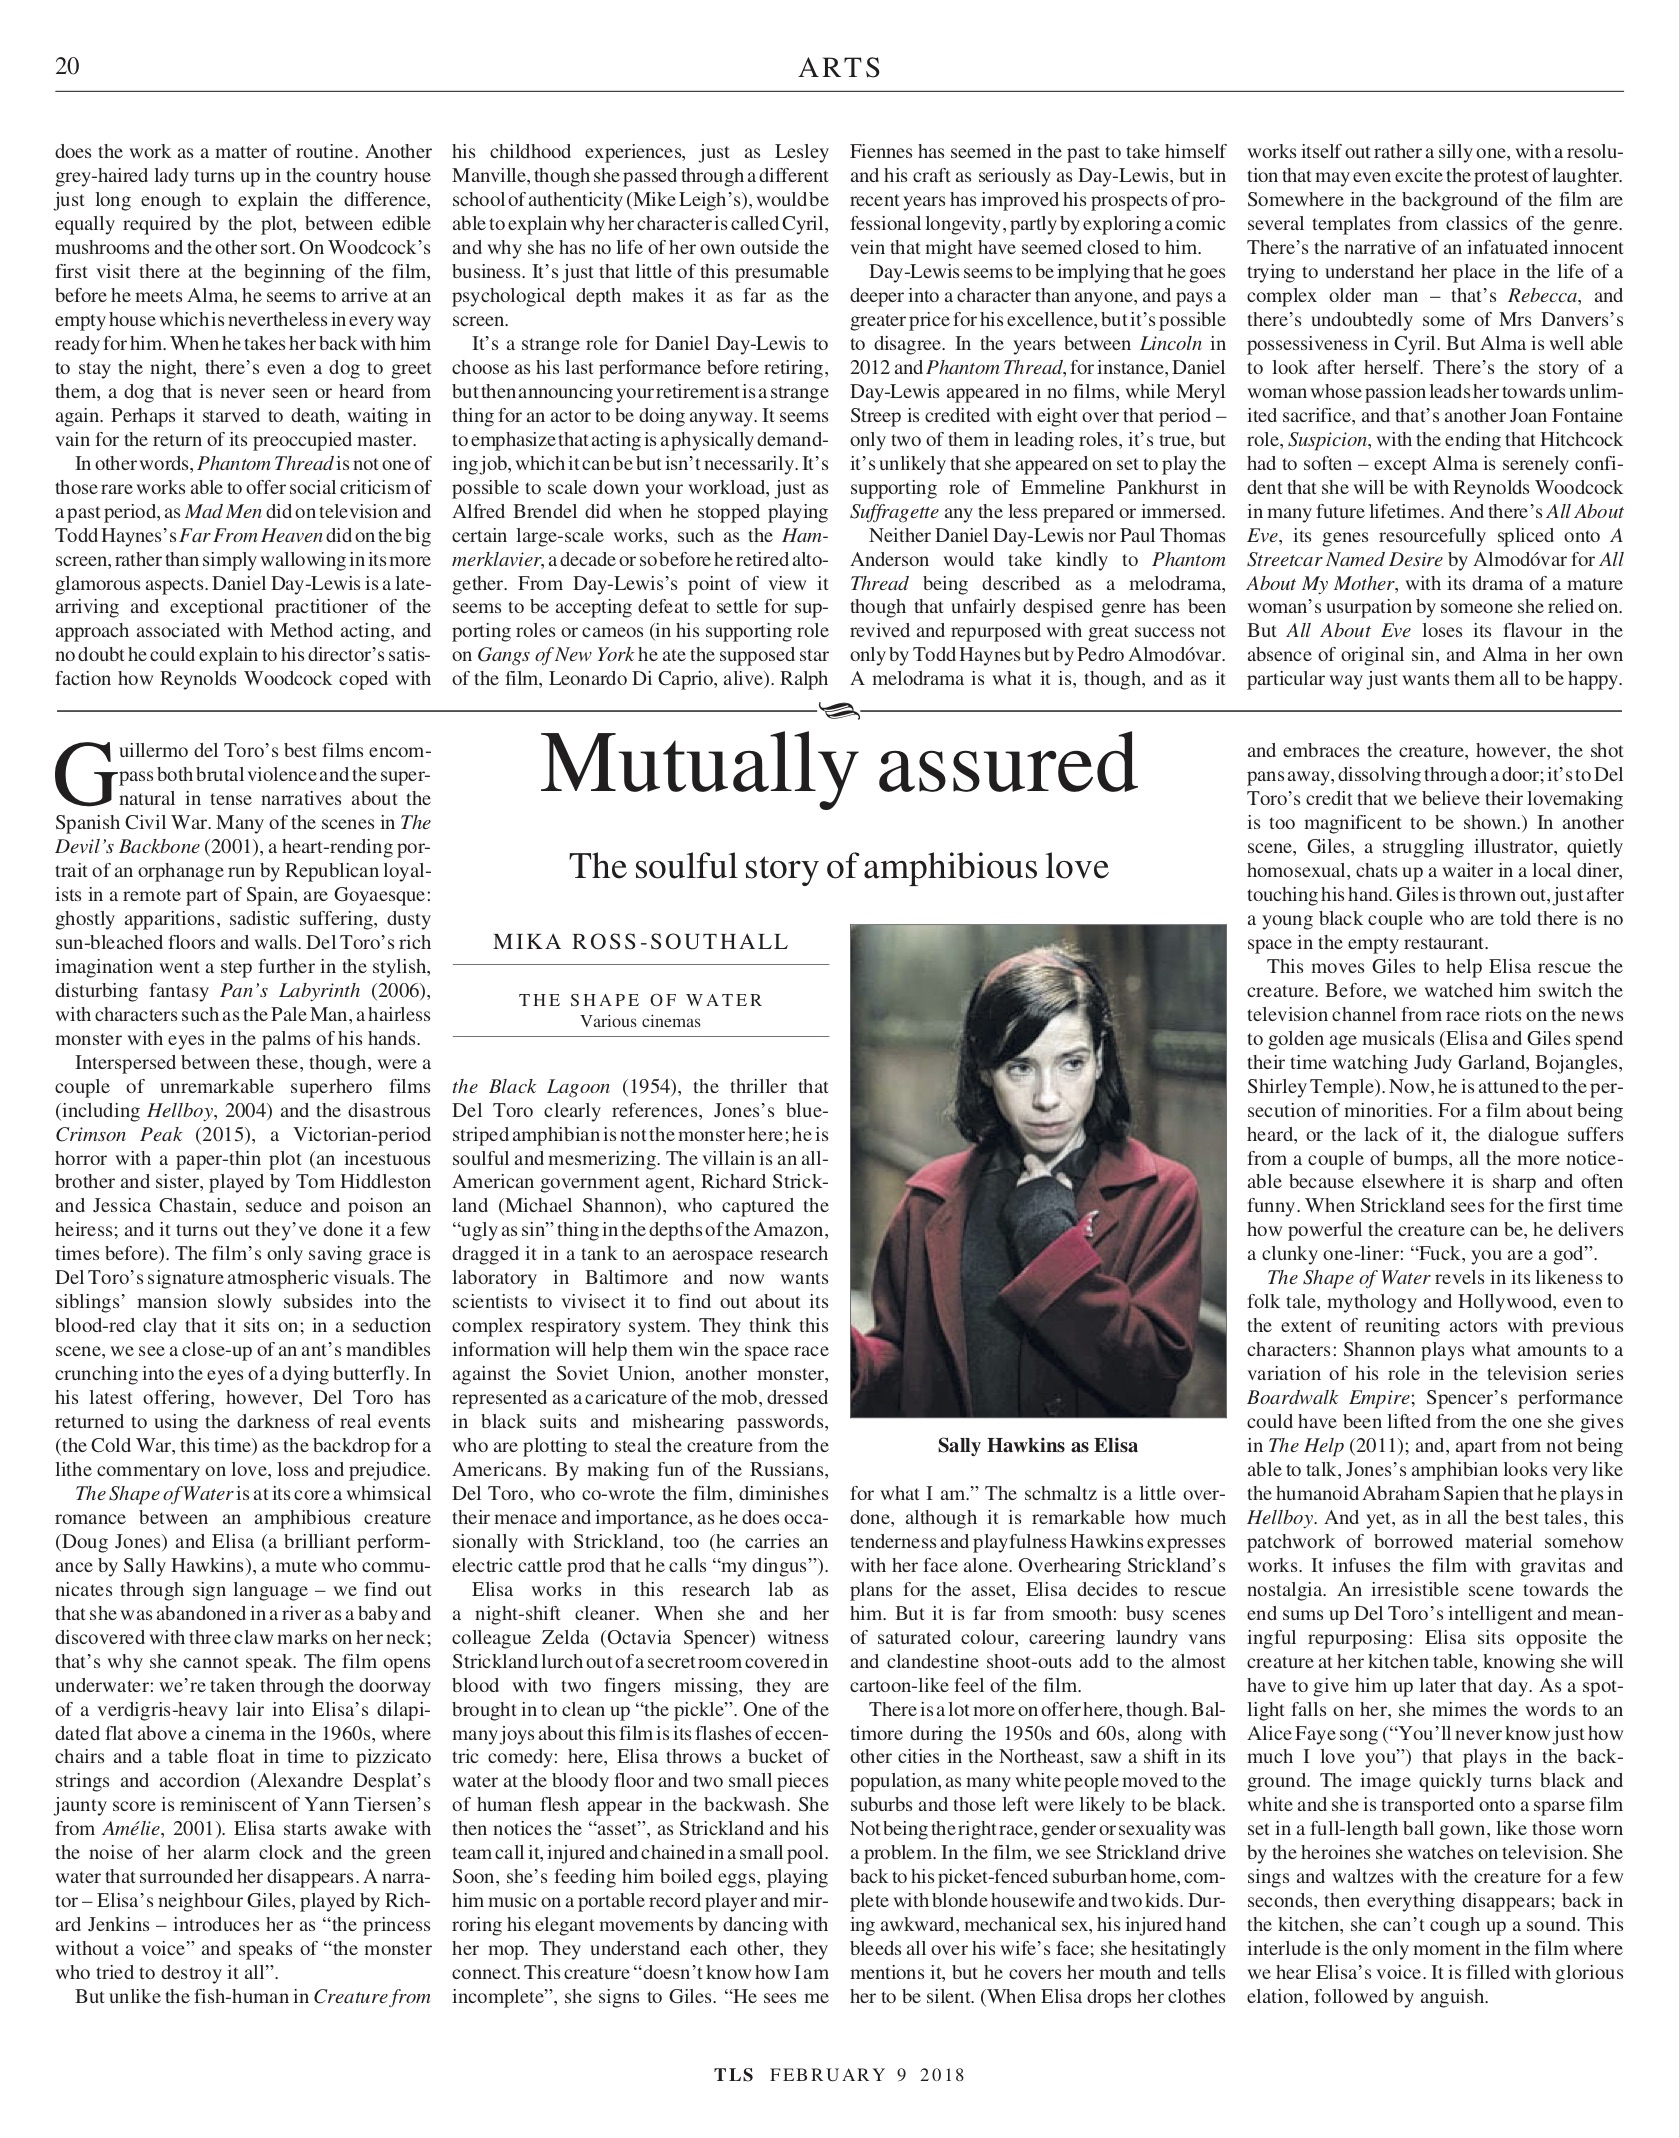 The Times Literary Supplement, 9 February 2018. "Mutually Assured"